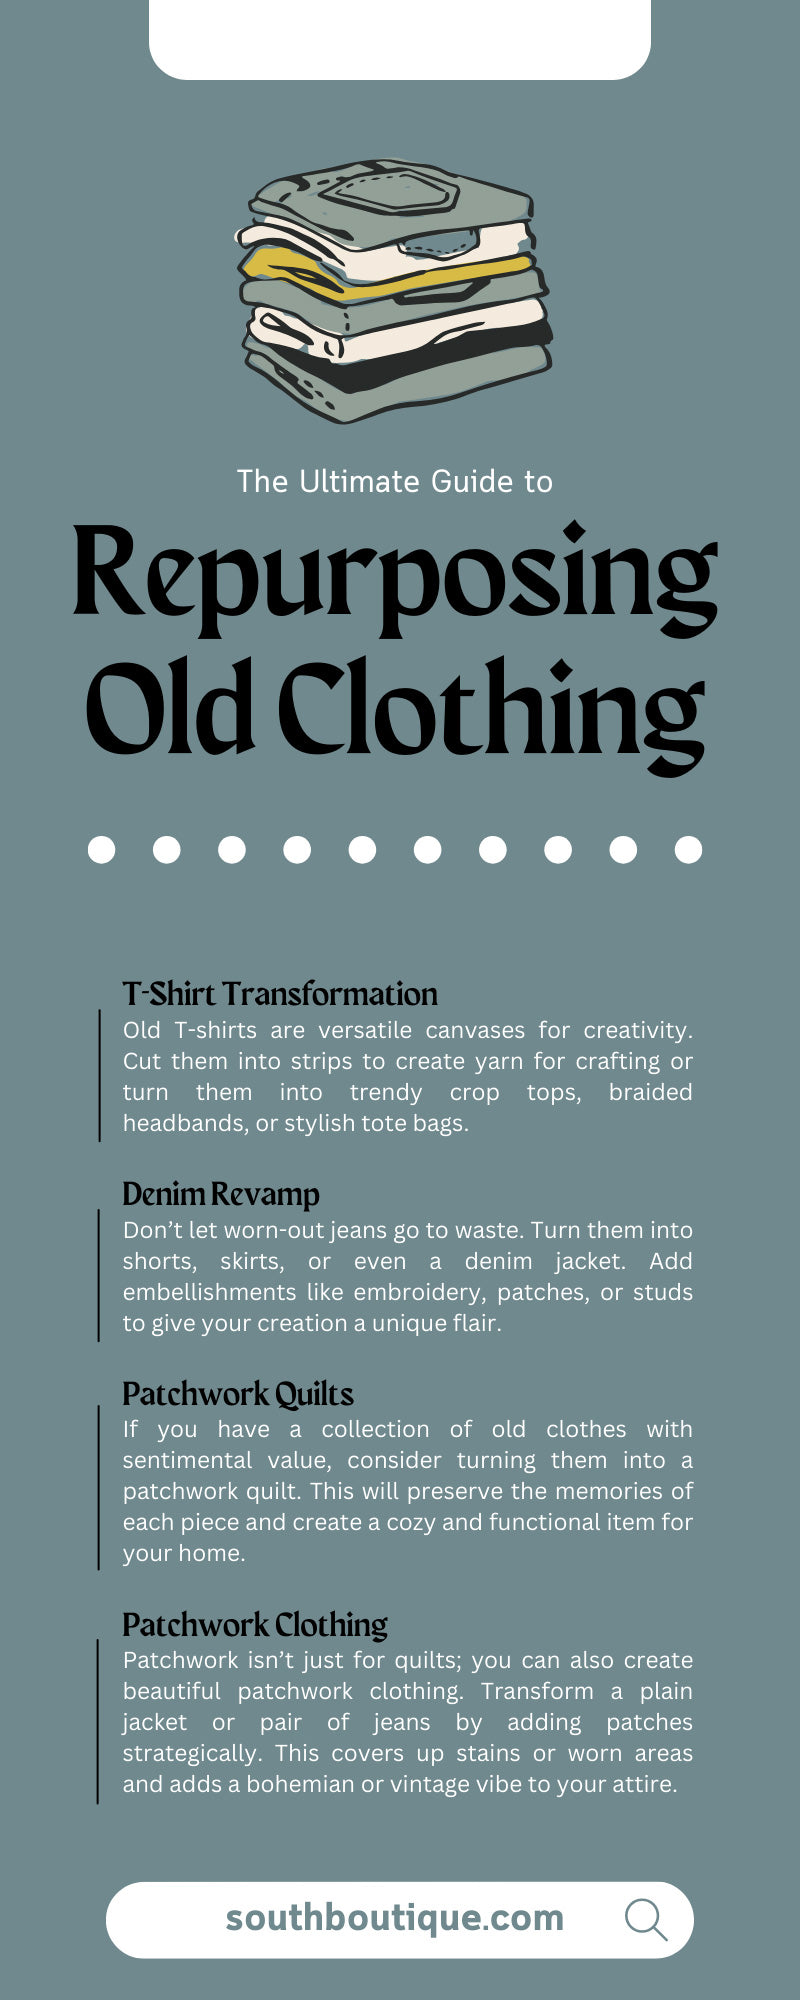 The Ultimate Guide to Repurposing Old Clothing